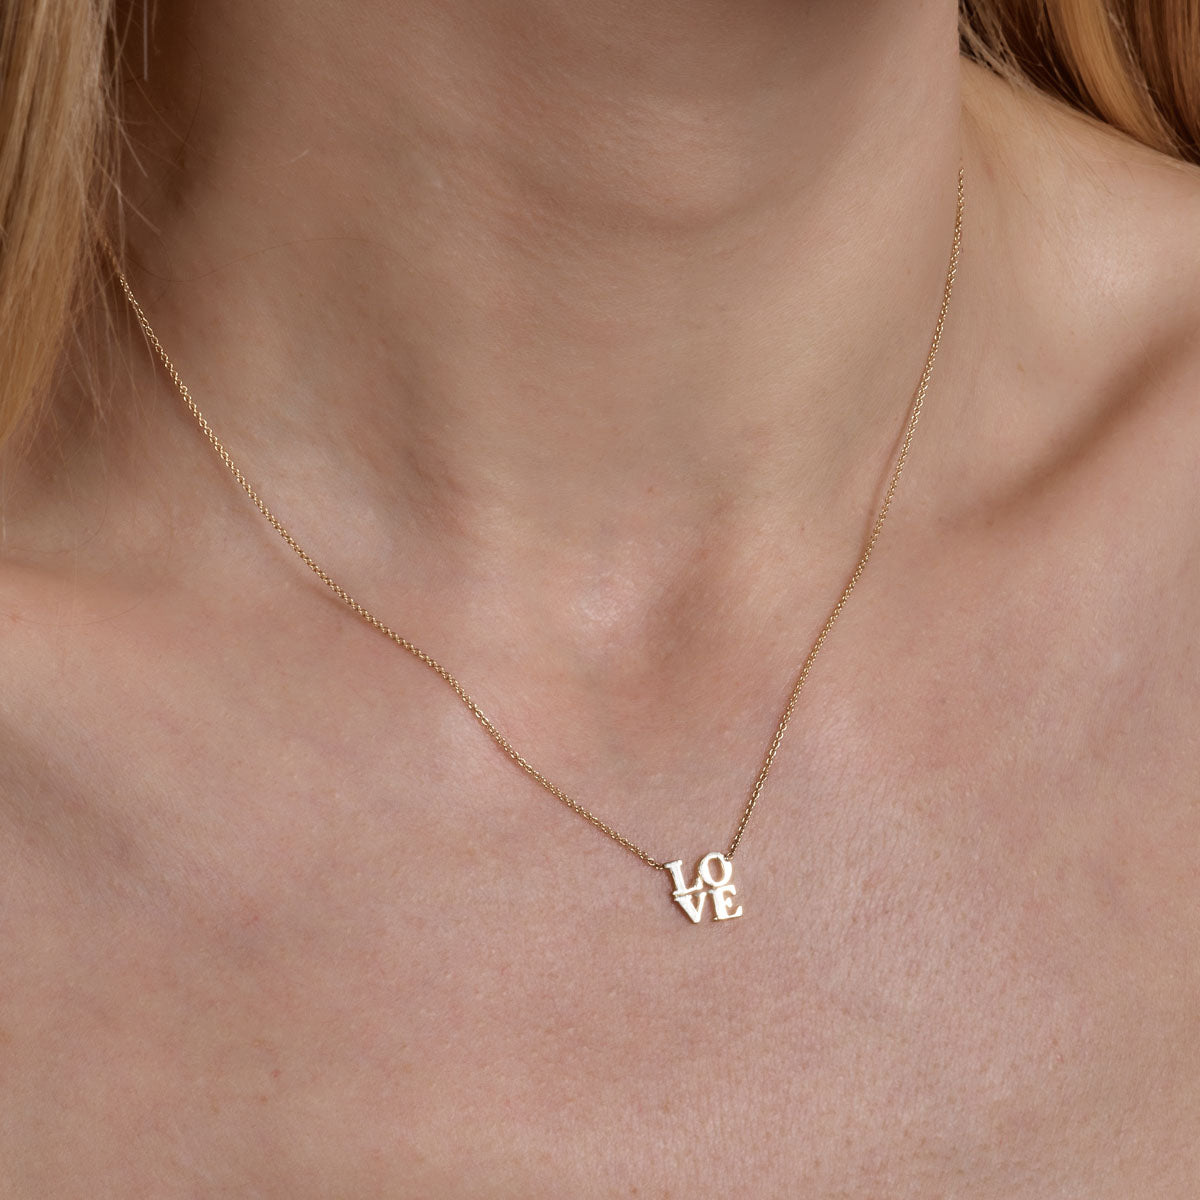 Gold LOVE word necklace - elegant scripted pendant on woman's neck